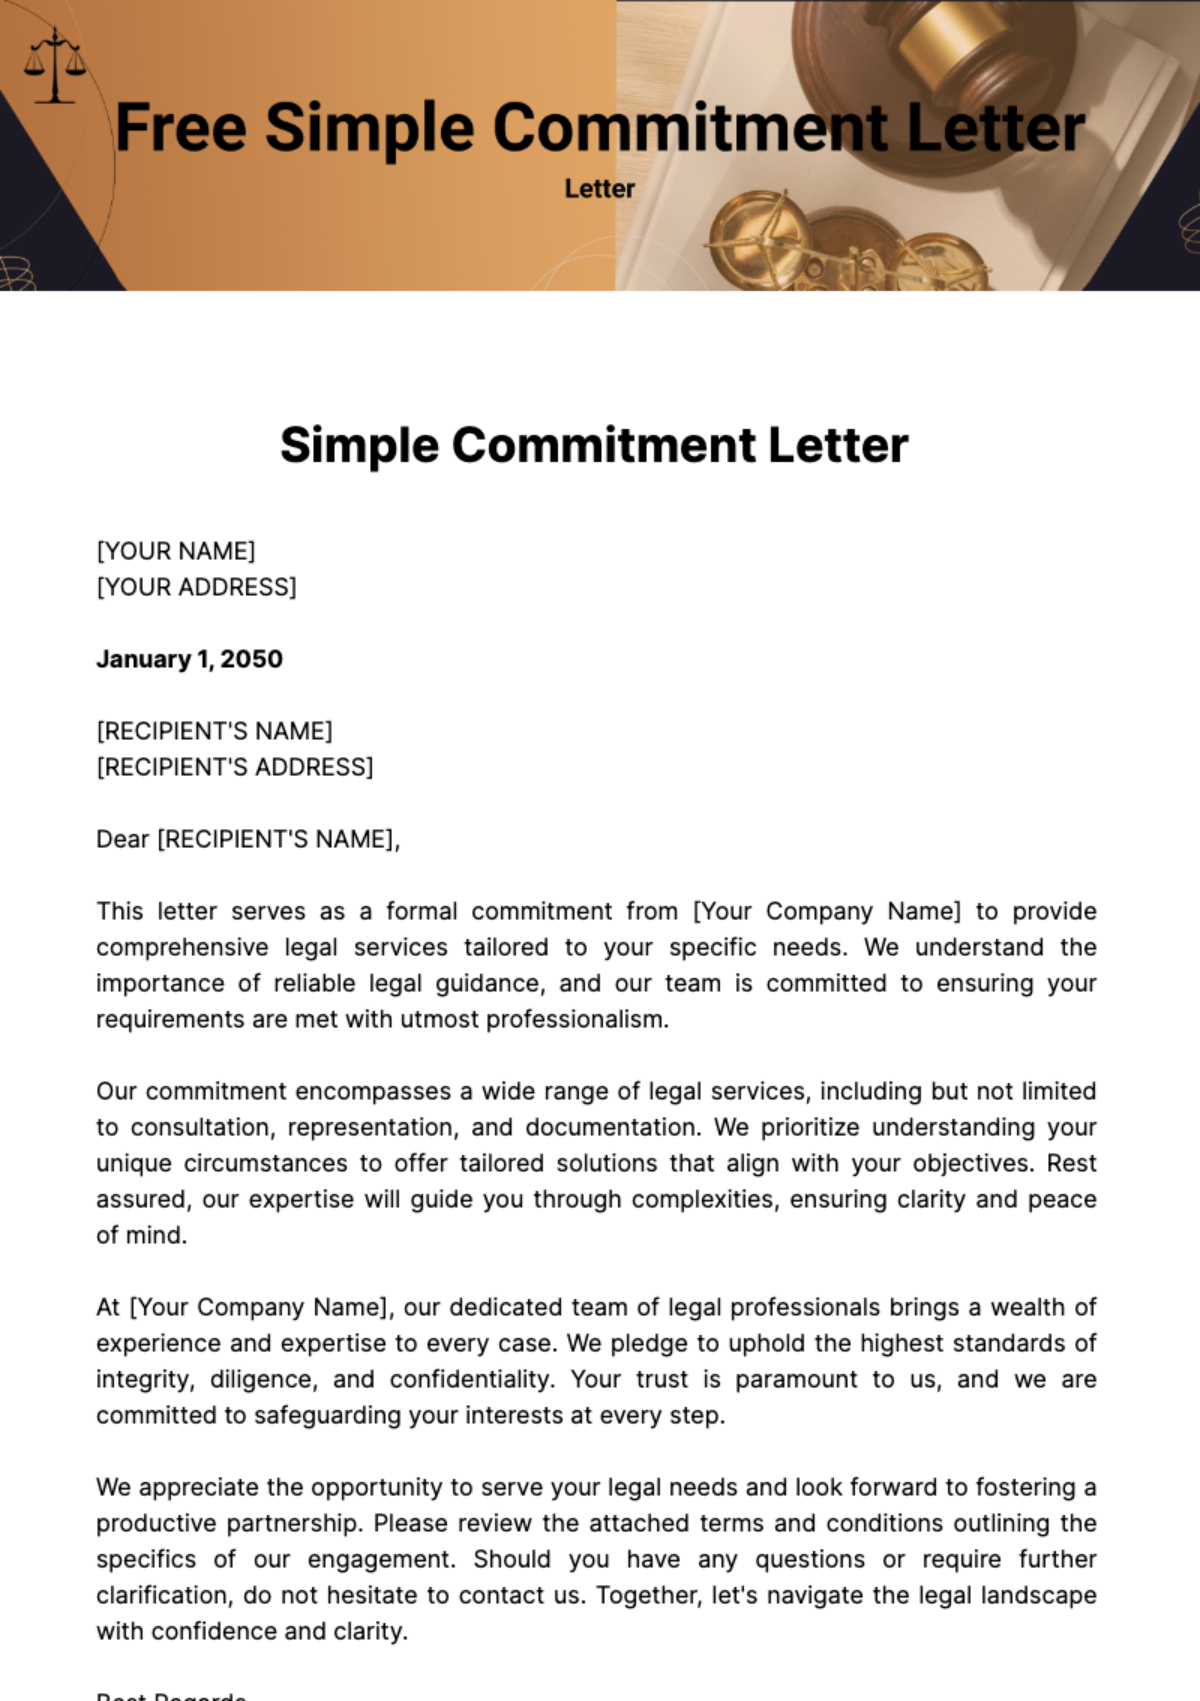 Free Simple Commitment Letter Template